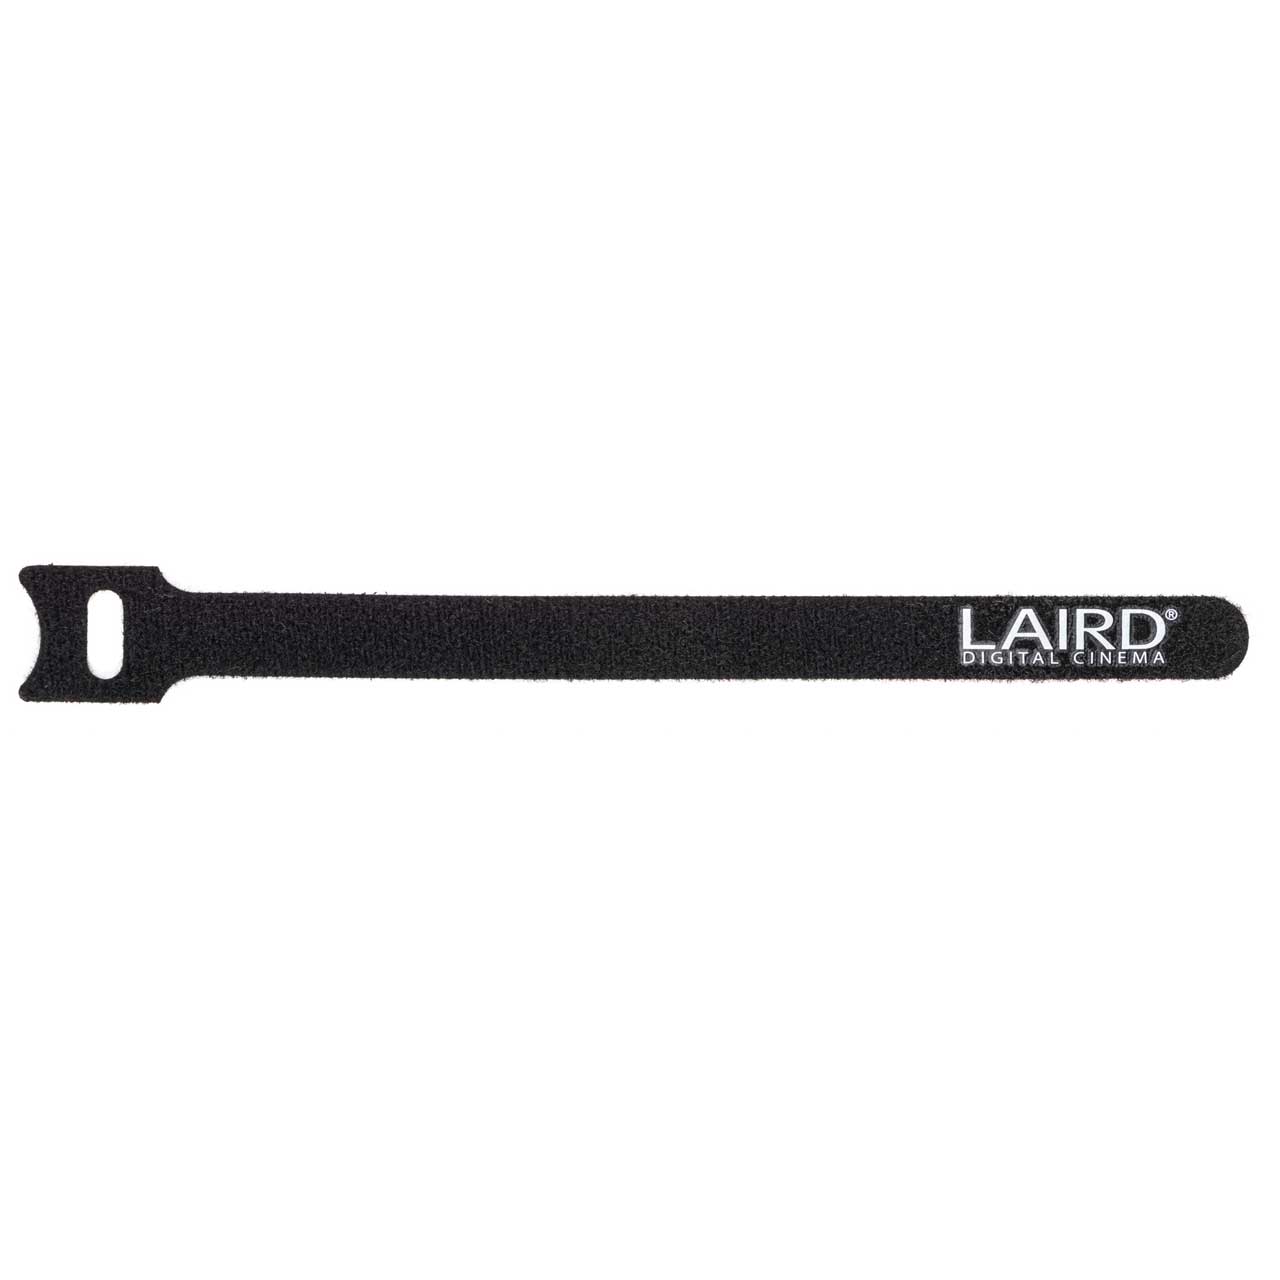 Laird Hook and Loop Cable Wrap 12mm x 180mm Black with White Logo - 500 Pack LDC-HKNLP-500PK